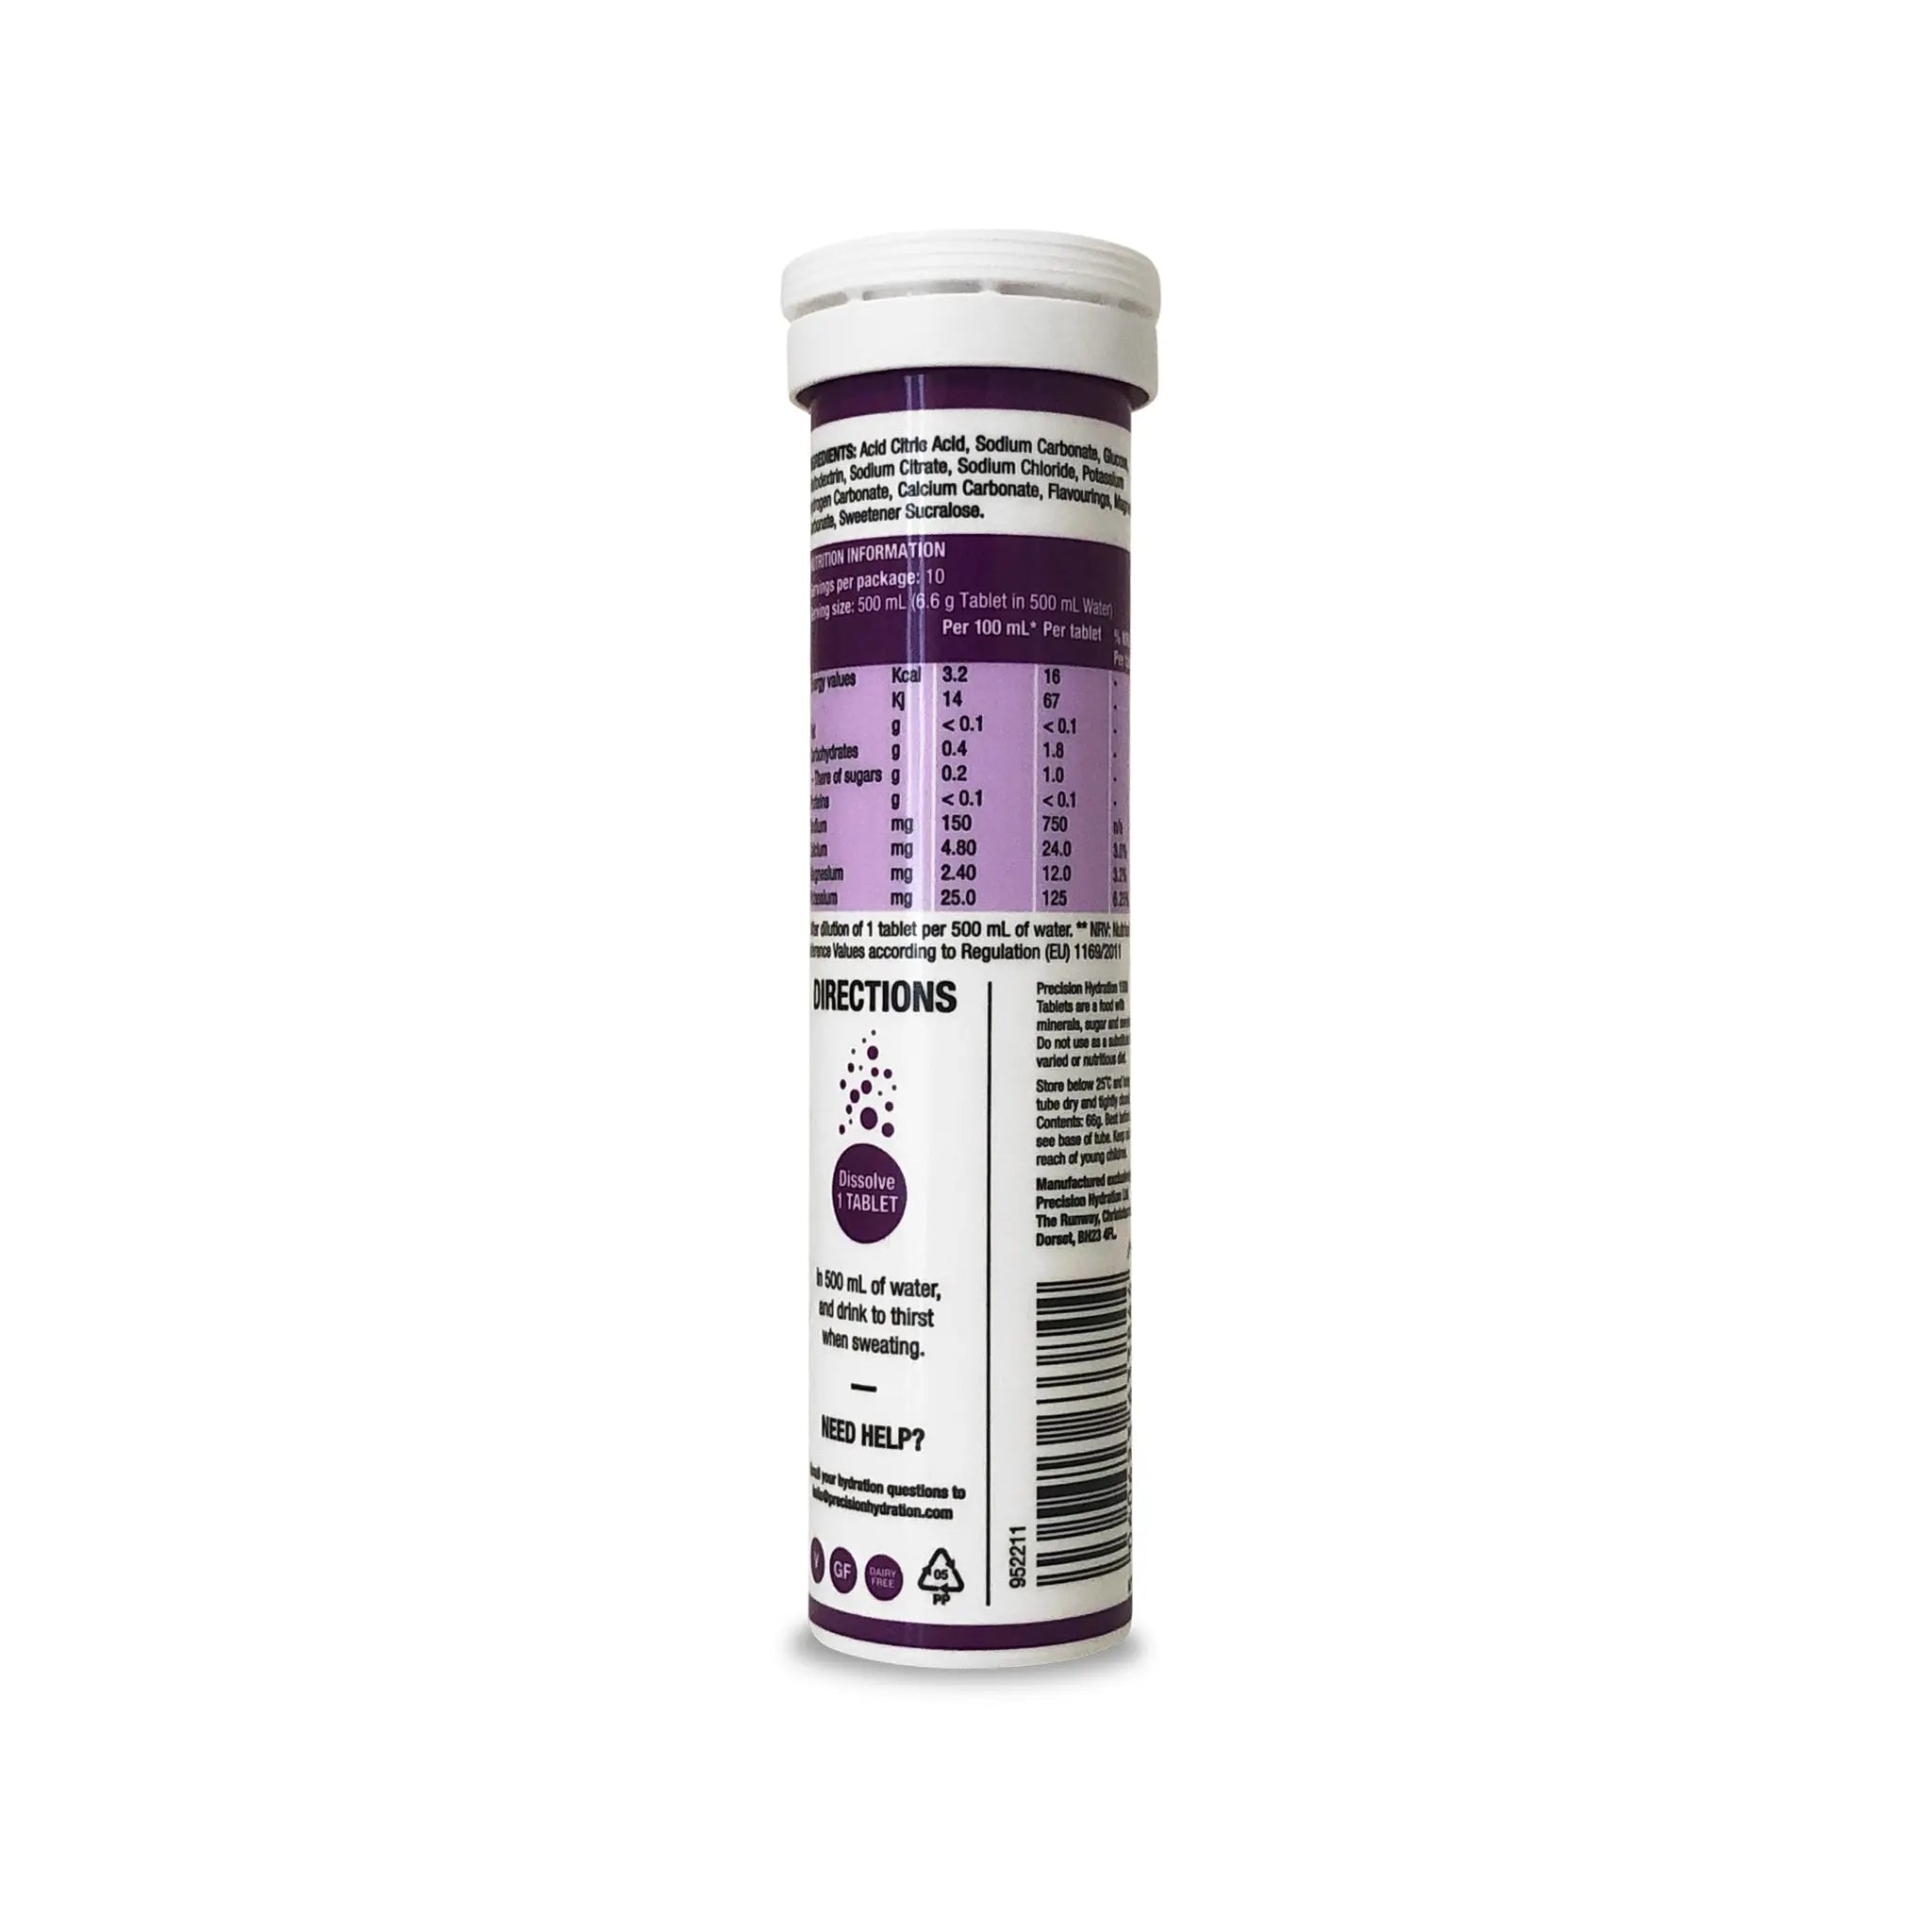 Precision Fuel & Hydration - PH 1500 Electrolyte Tablets